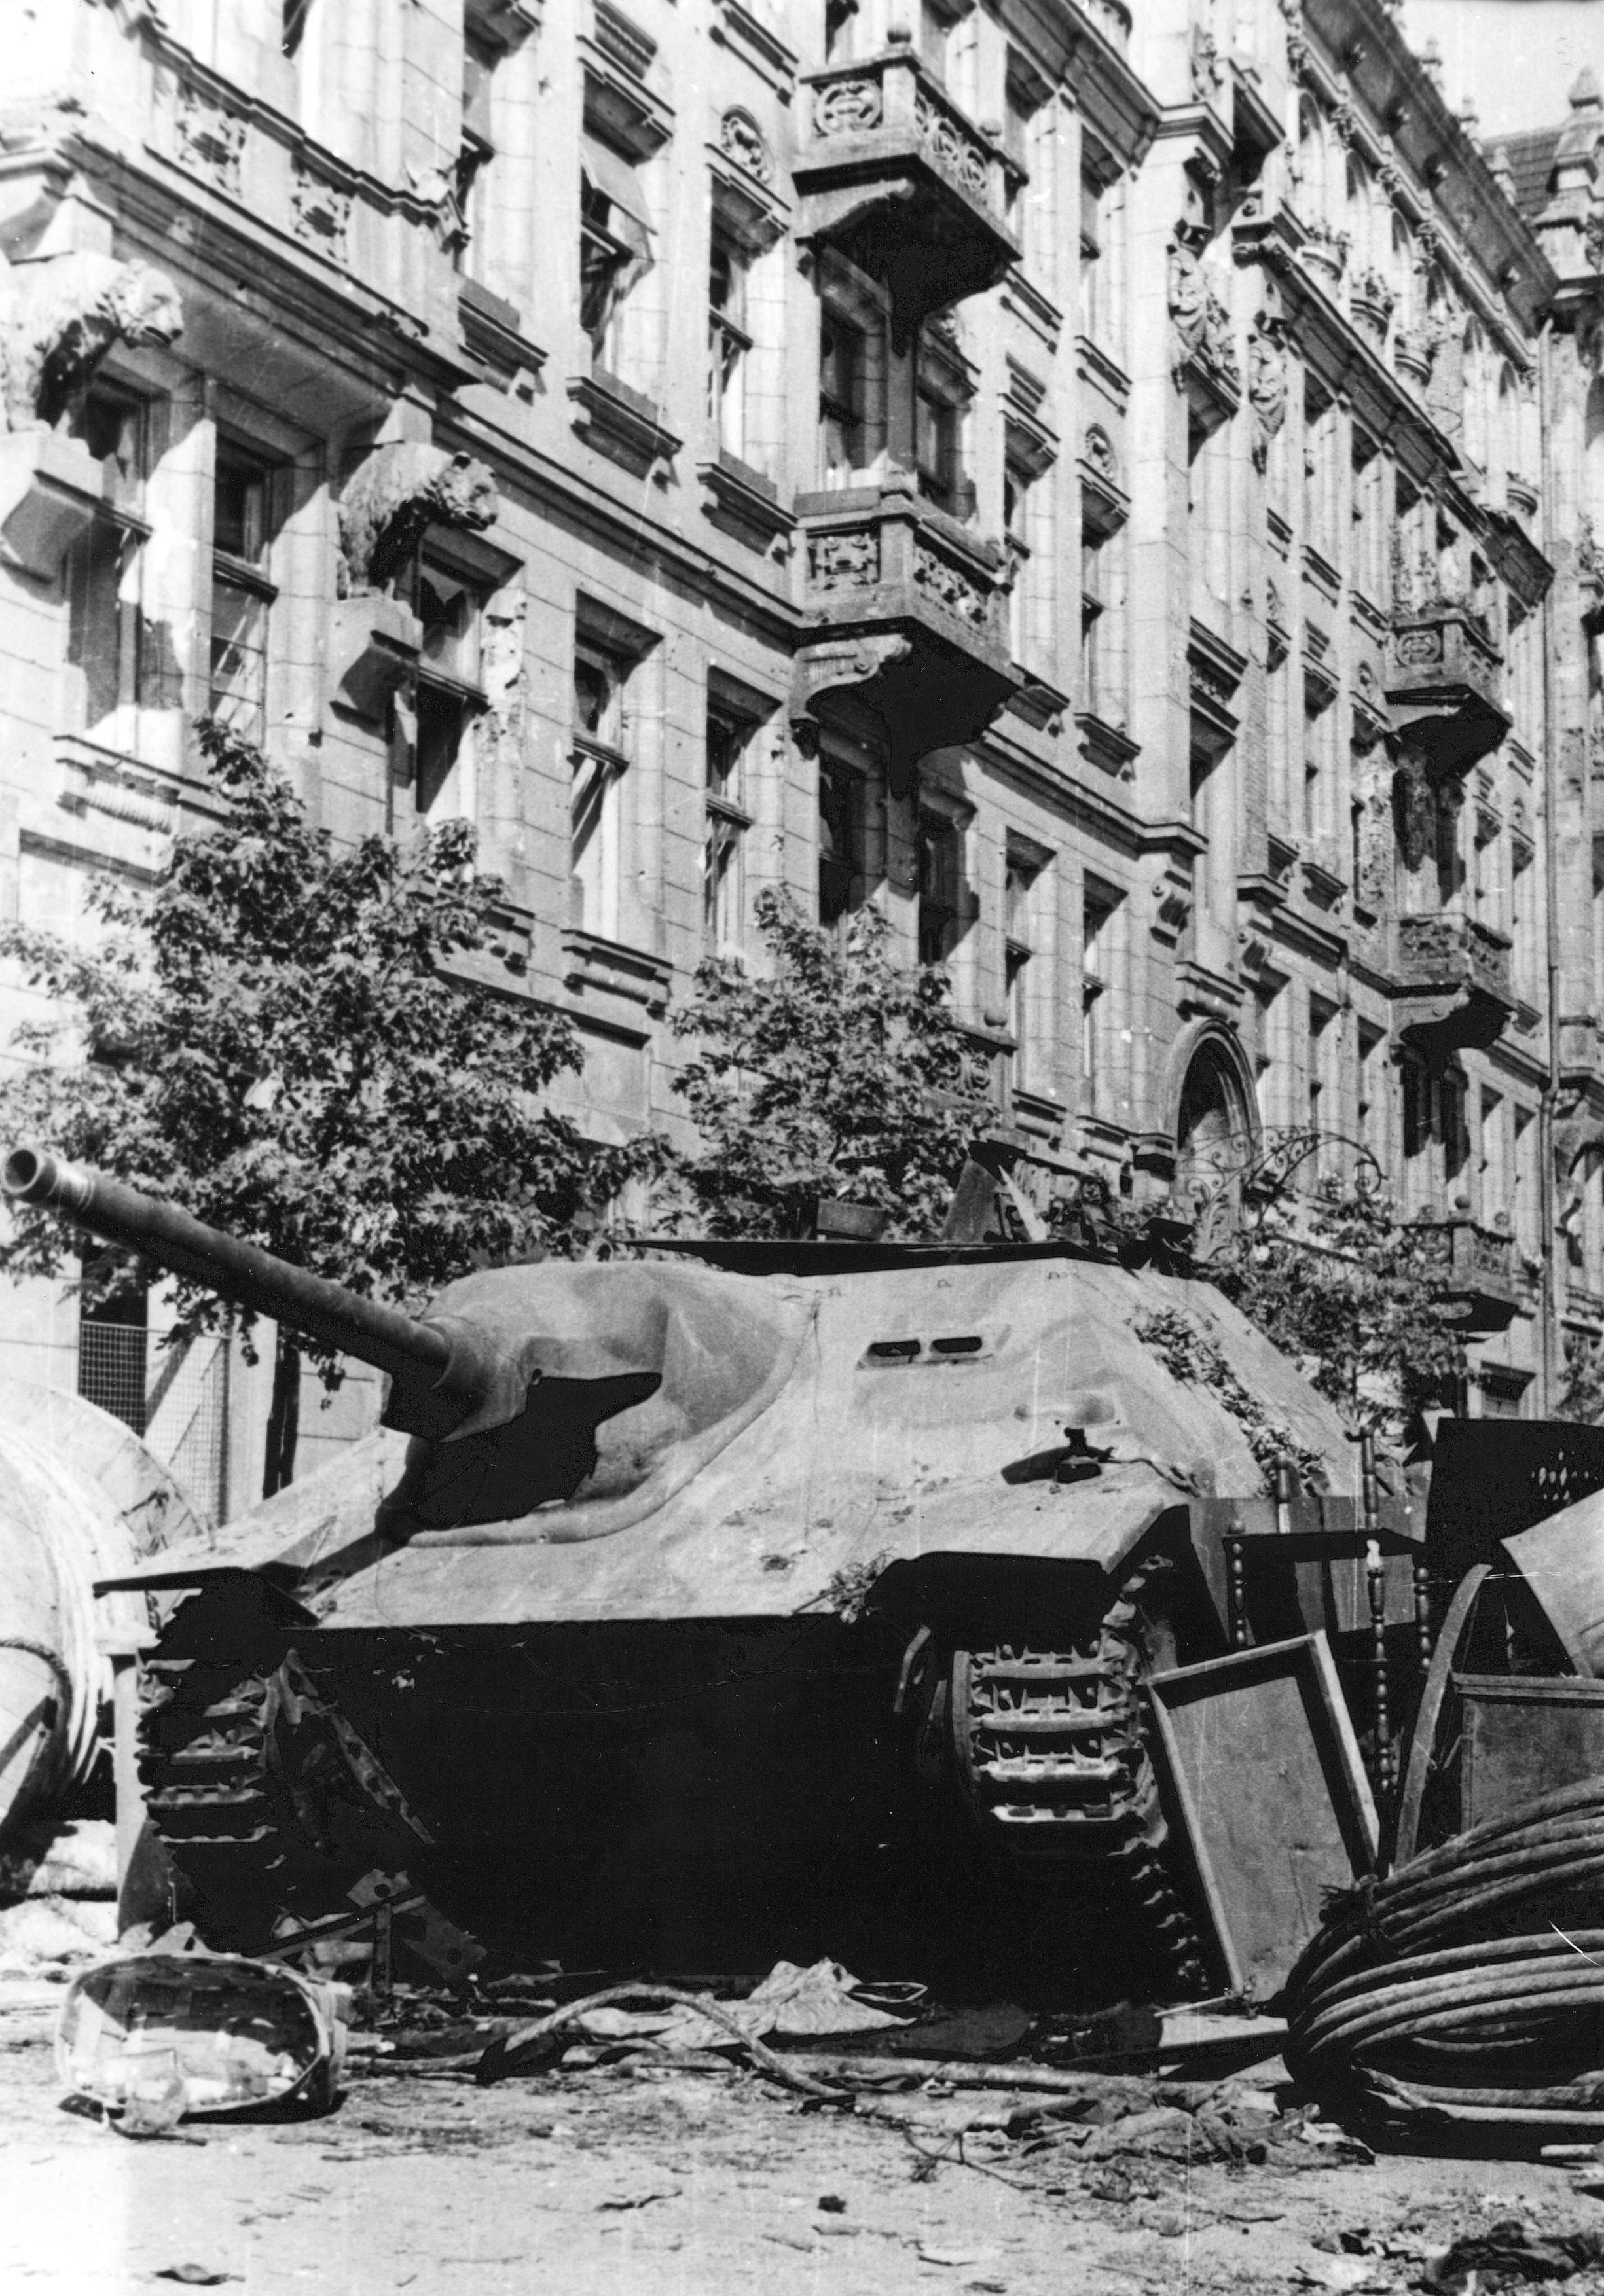 Polish barricade at Napoleon Square, Warsaw, Poland, 3 Aug 1944, photo 2 of 4; note captured Jagdpanzer 38(t) tank destroyer as part of barricade